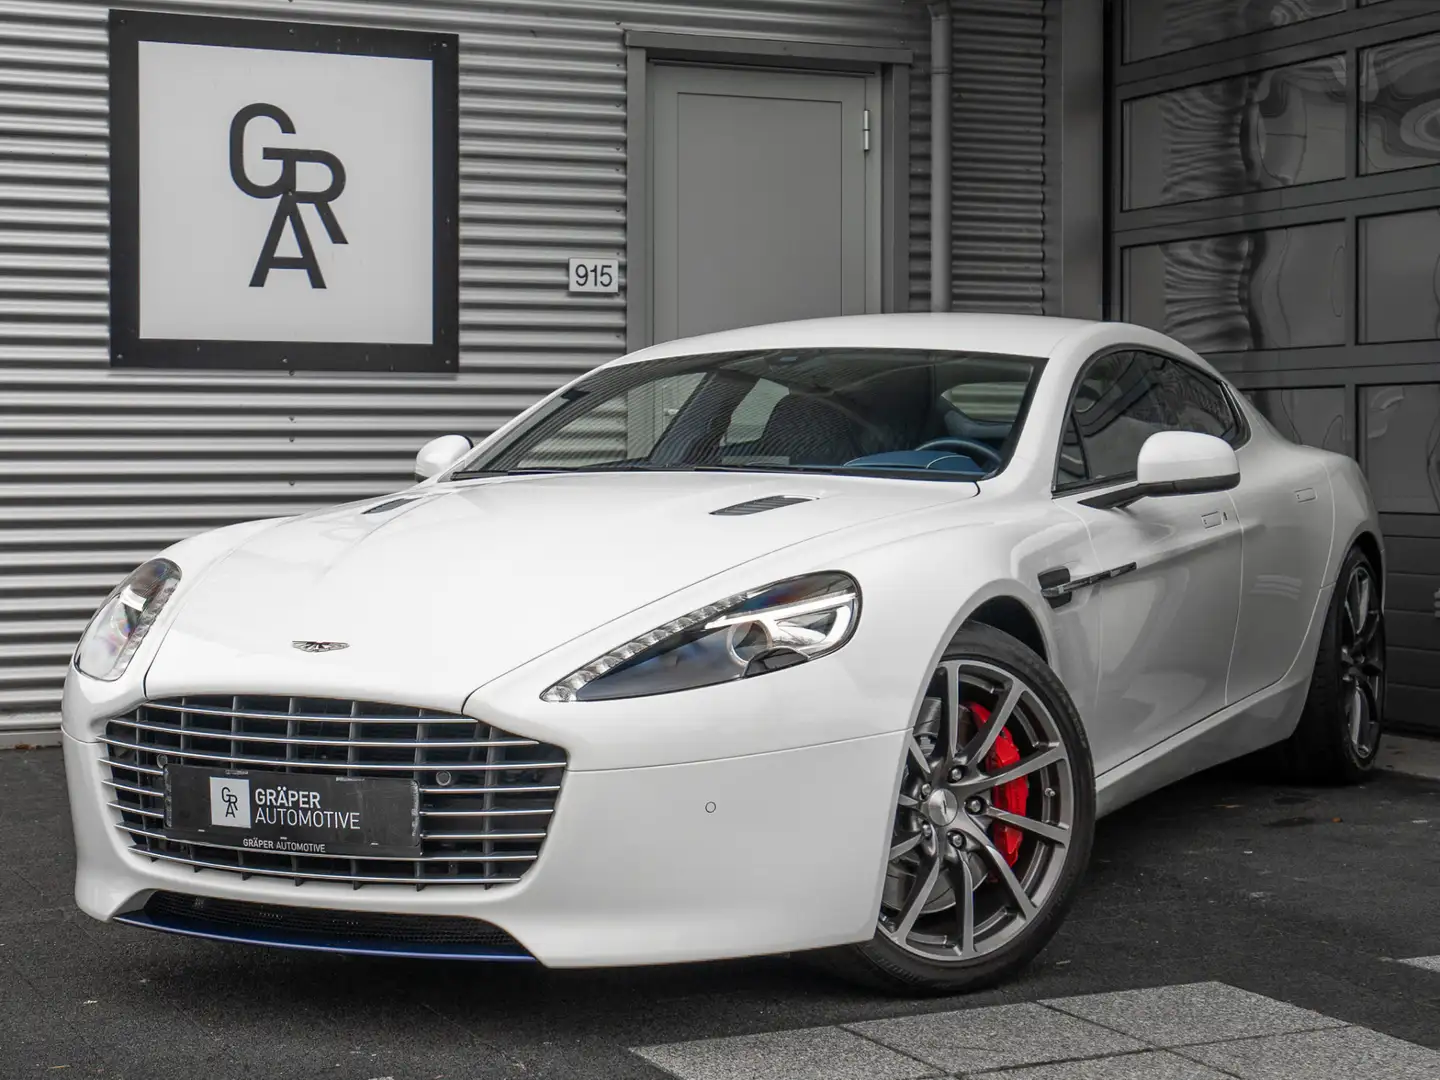 Aston Martin Rapide S 6.0 V12 ‘Britain is Great’ Edition by Q 1/8 Blanc - 1